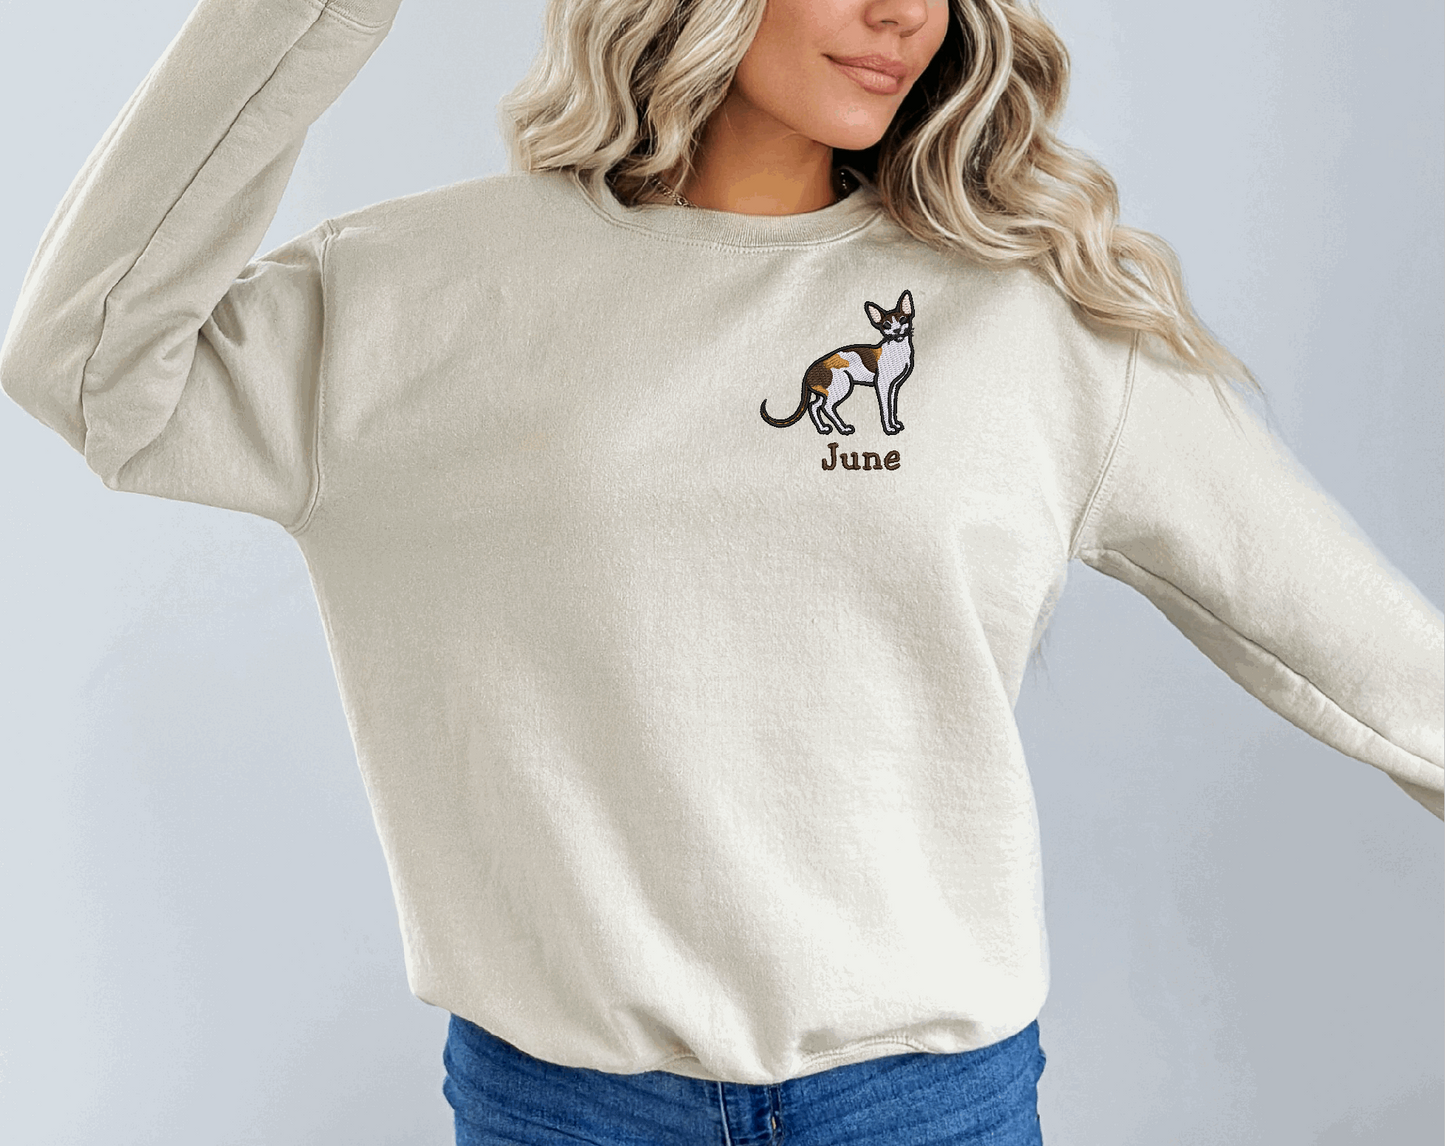 a woman wearing a white sweatshirt with a dog embroidered on it